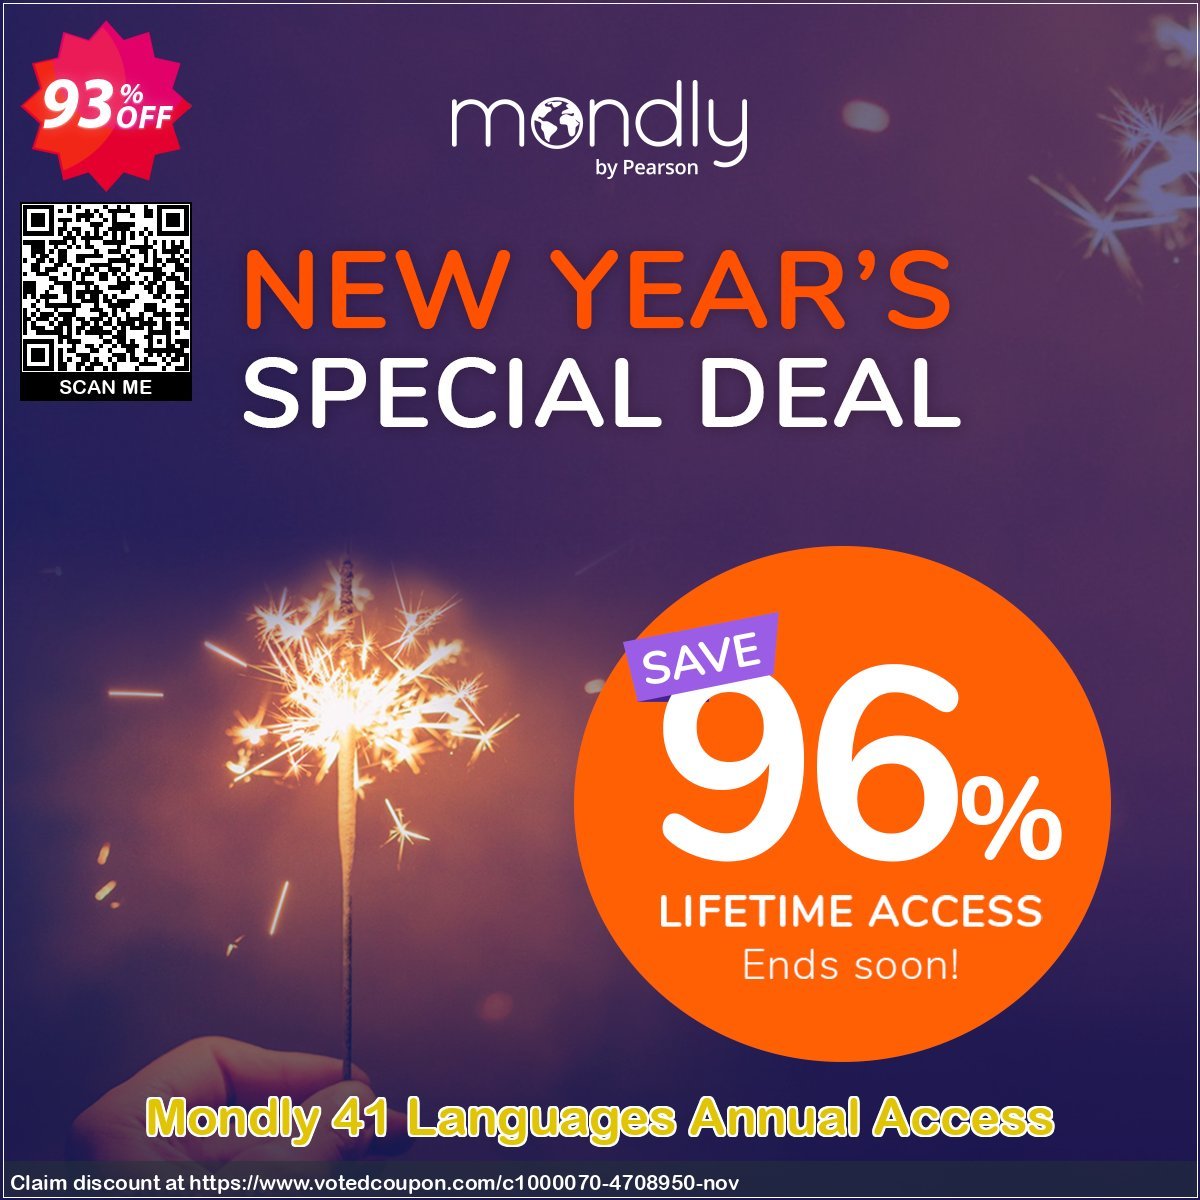 Mondly 41 Languages Annual Access Coupon Code Mar 2024, 93% OFF - VotedCoupon